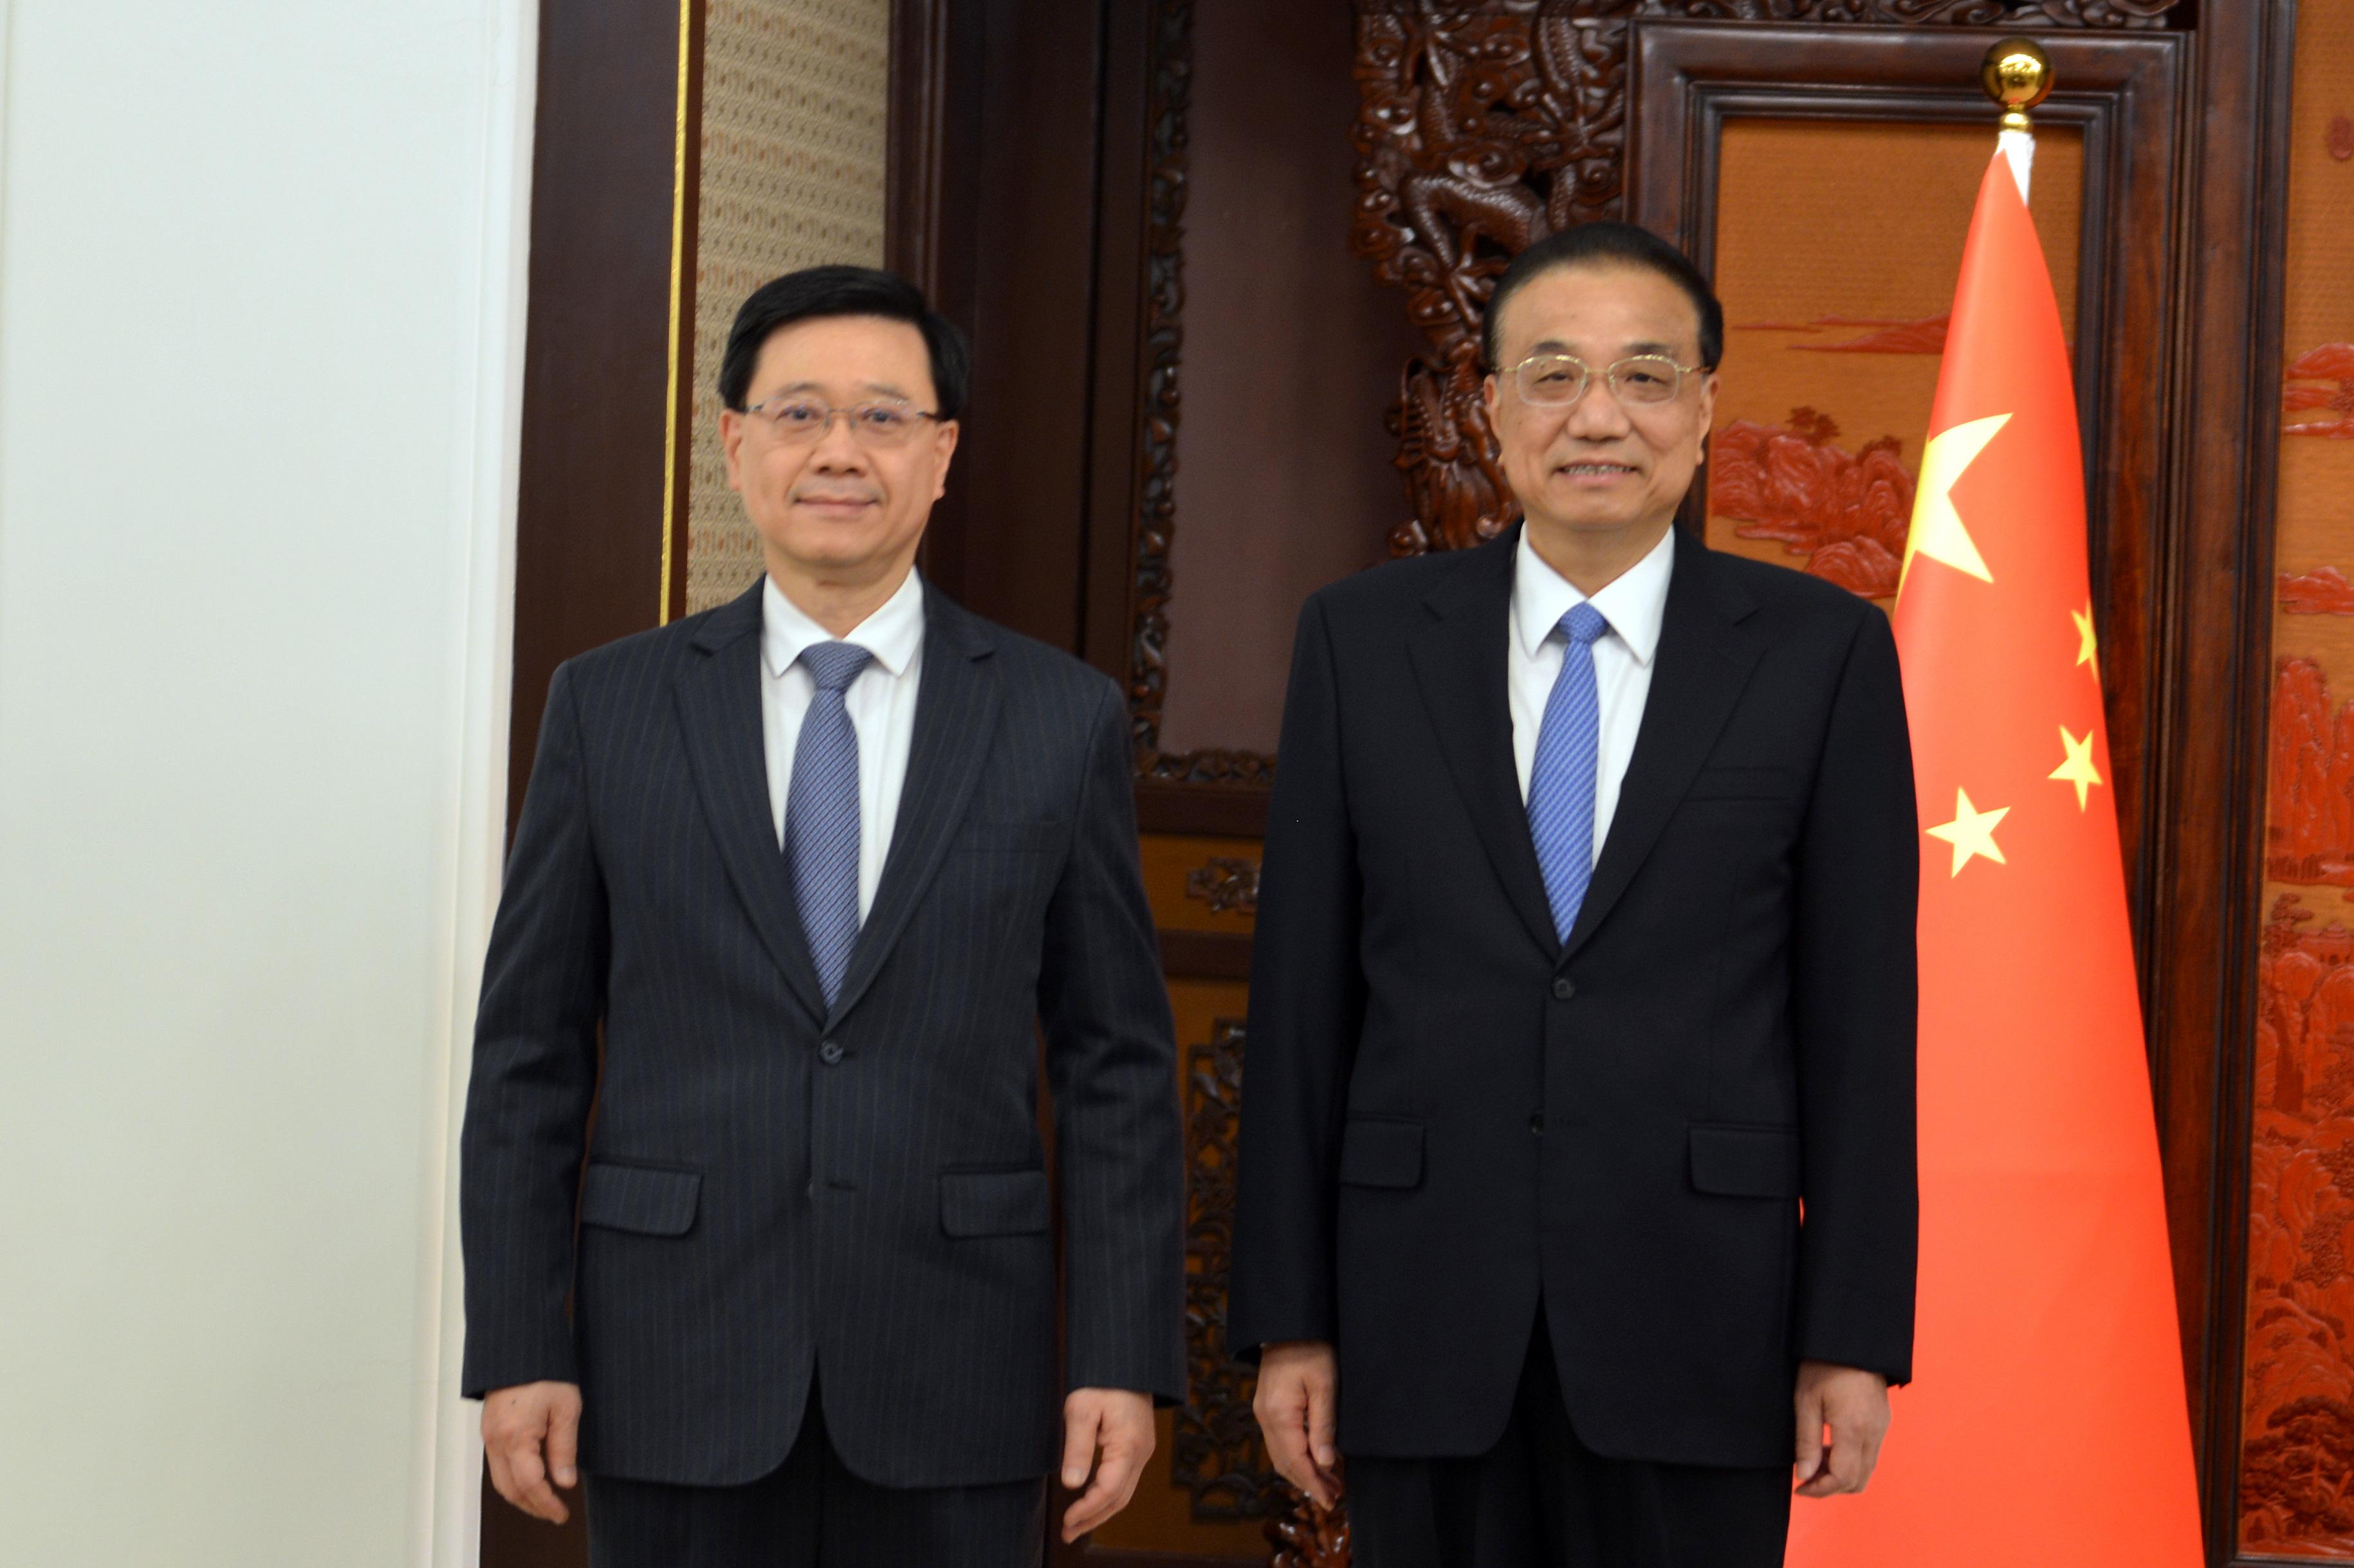 The Chief Executive, Mr John Lee (left), briefed Premier Li Keqiang in Beijing today (December 22) on the latest economic, social and political situation in Hong Kong. They are pictured before the meeting.